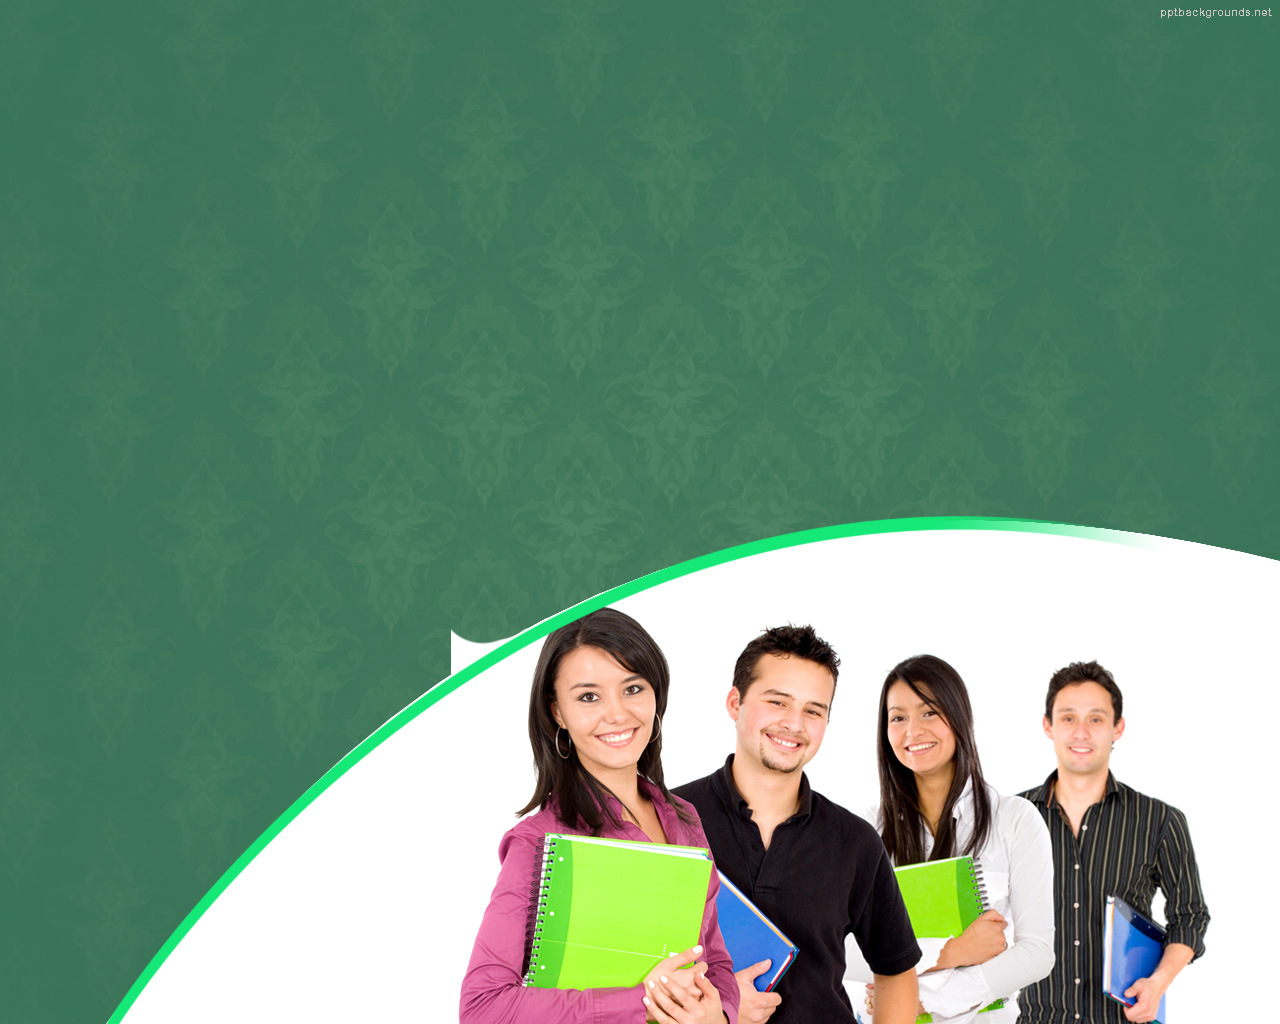 Group Of Students Education Background For Powerpoint